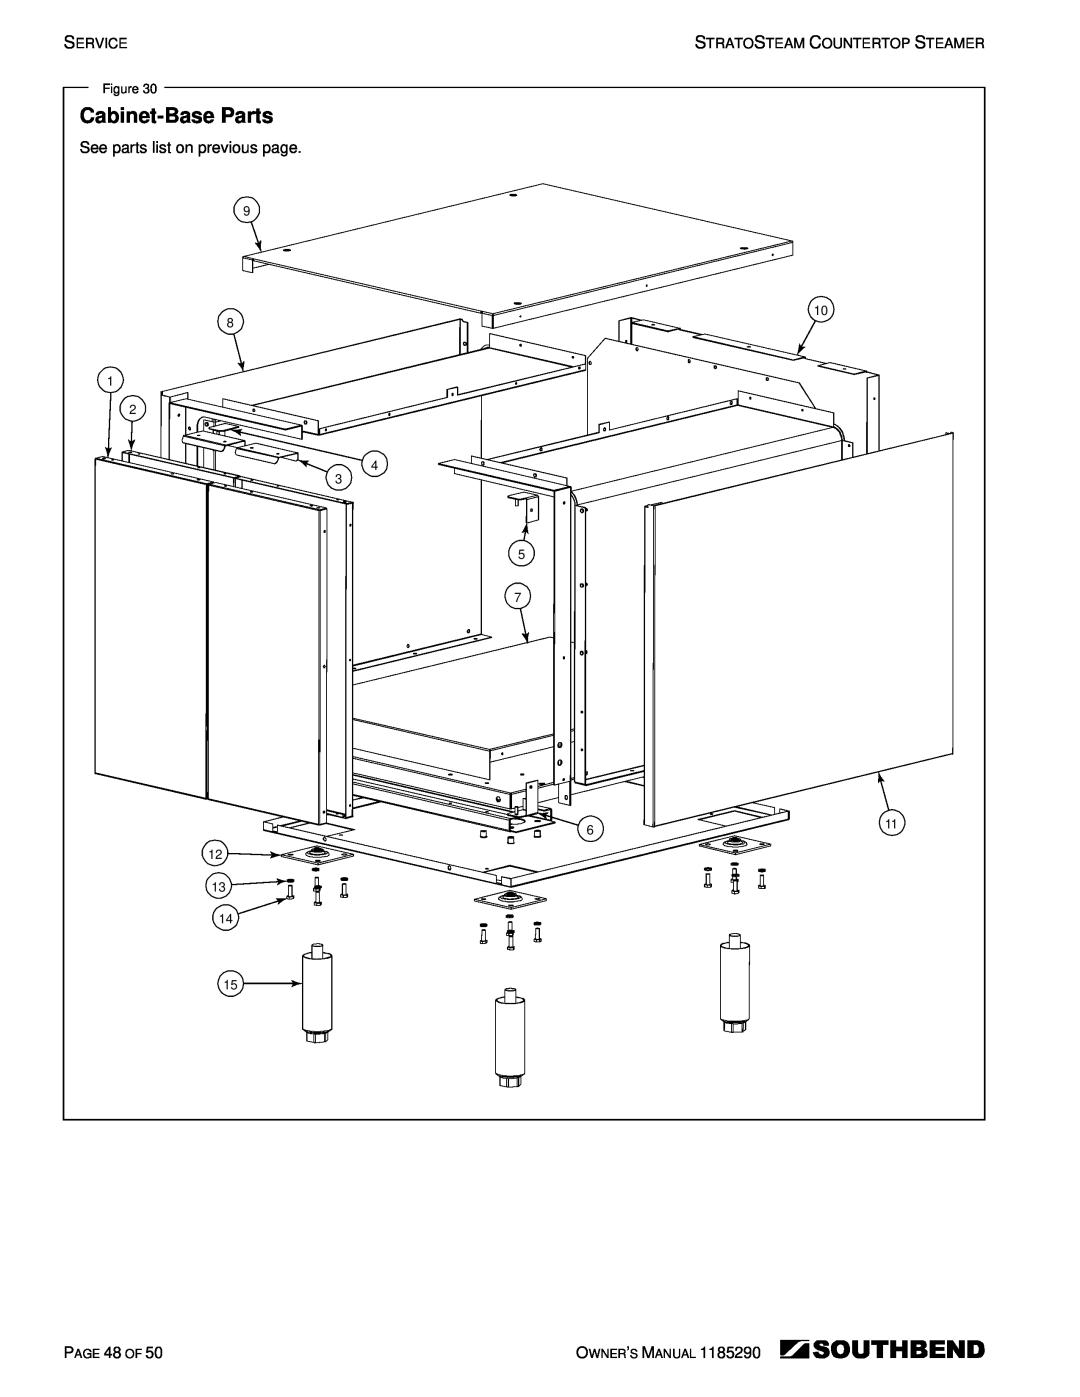 Southbend STRG-5D, STRG-3D manual Cabinet-Base Parts, PAGE 48 OF 